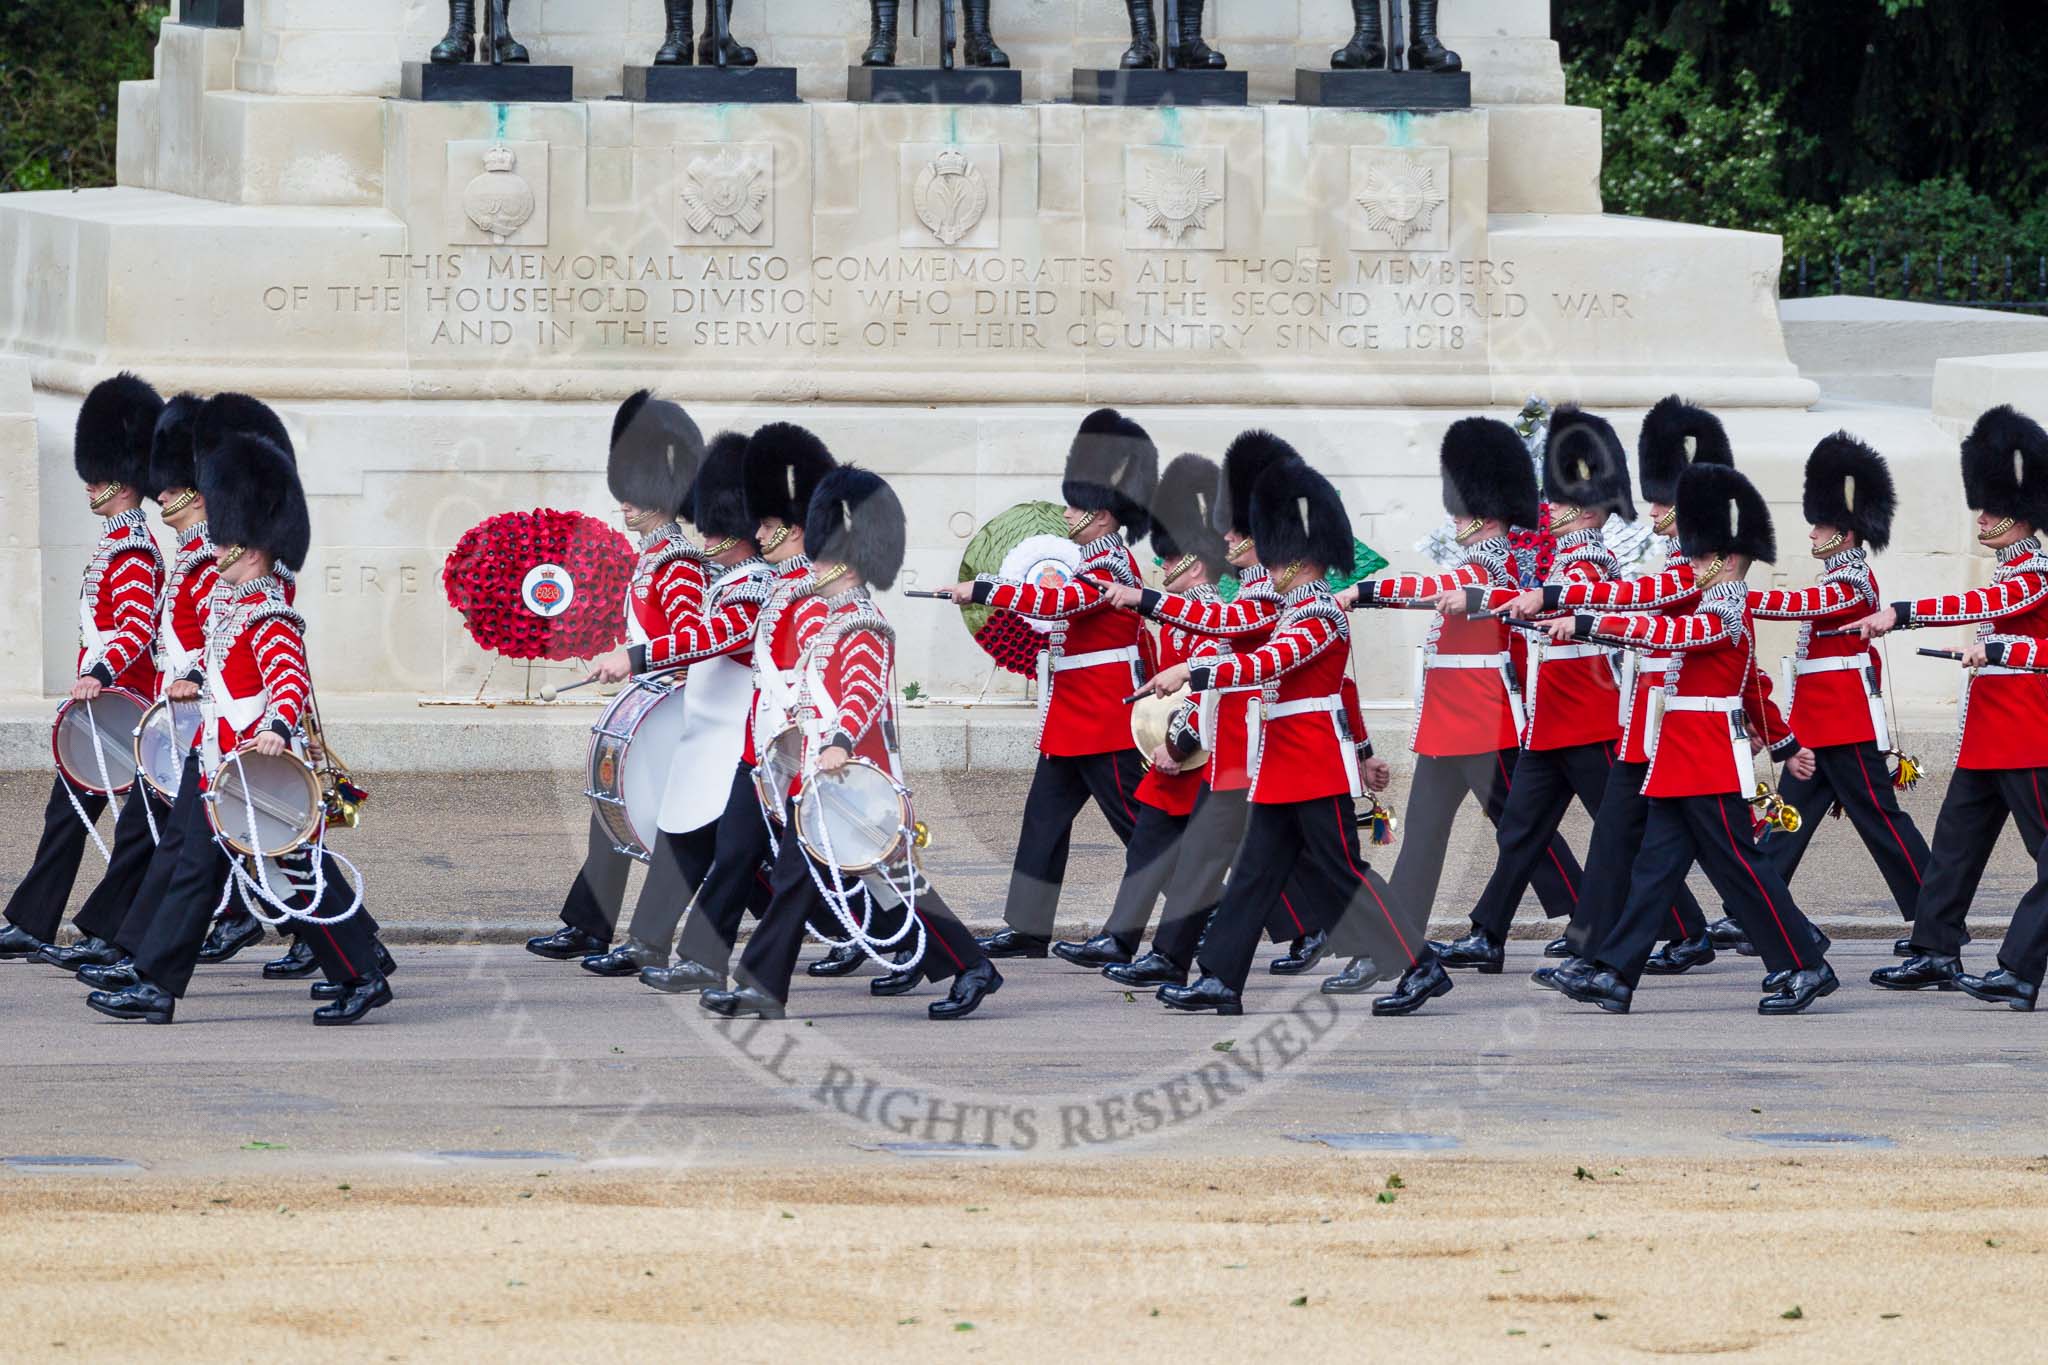 The Colonel's Review 2015.
Horse Guards Parade, Westminster,
London,

United Kingdom,
on 06 June 2015 at 10:28, image #72